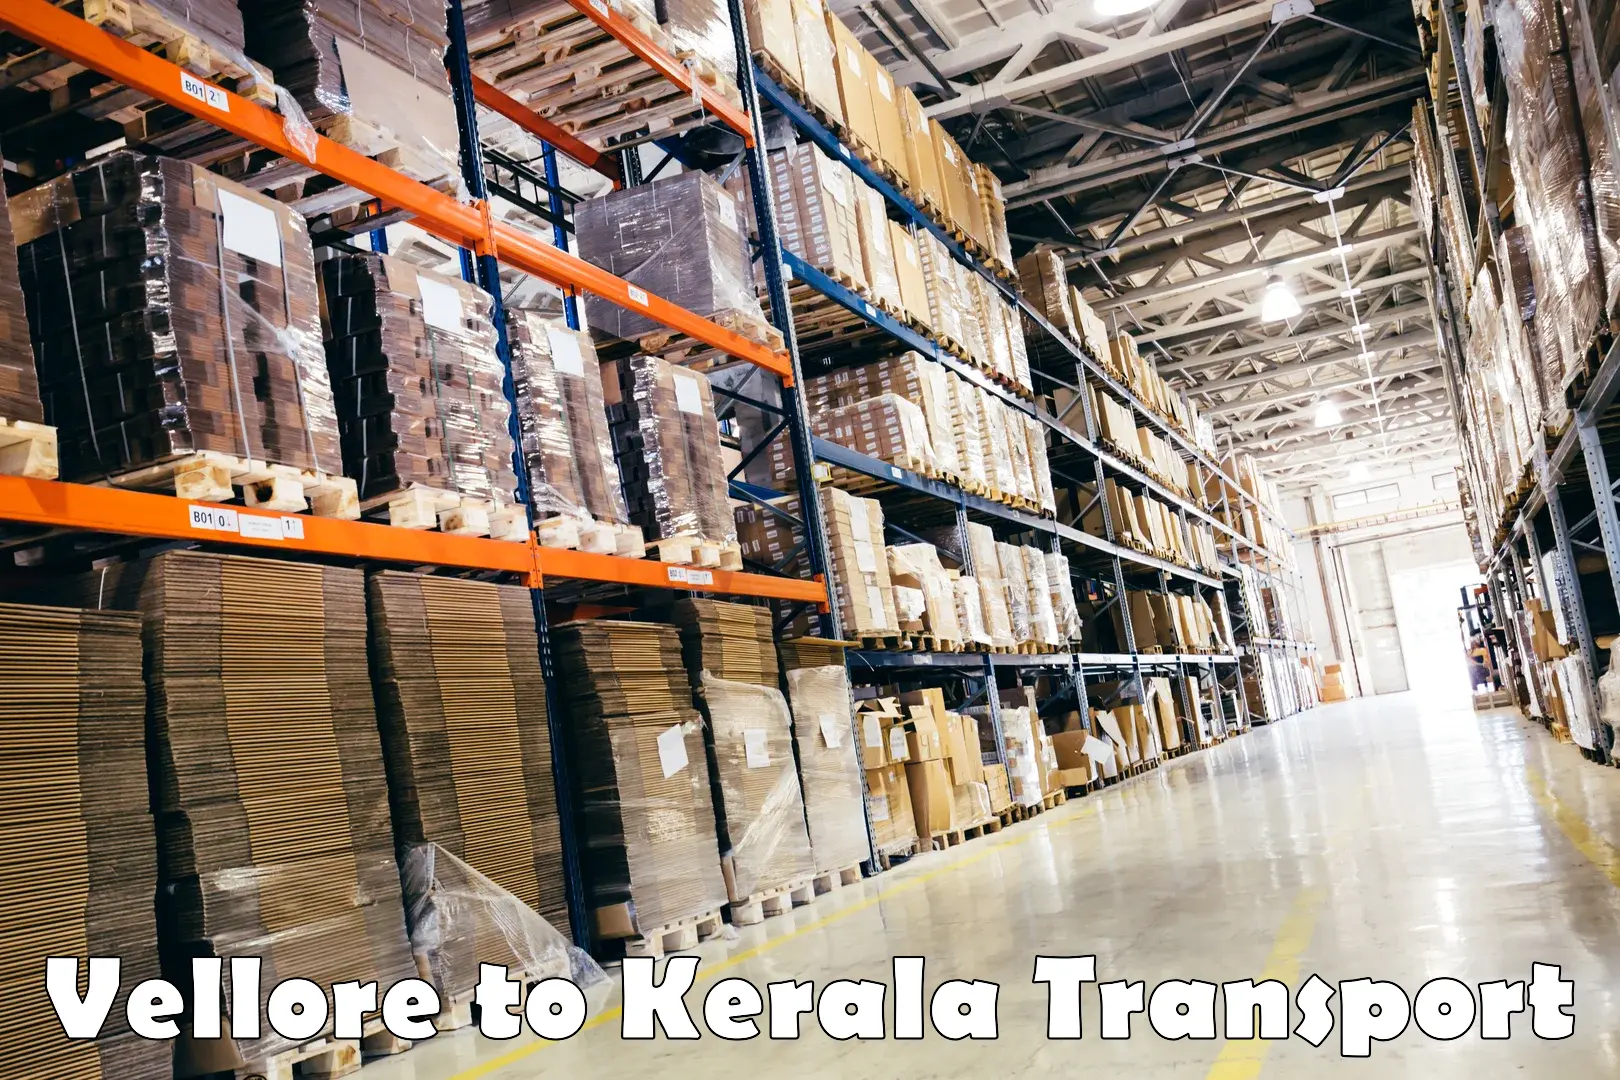 Transport bike from one state to another Vellore to Kerala